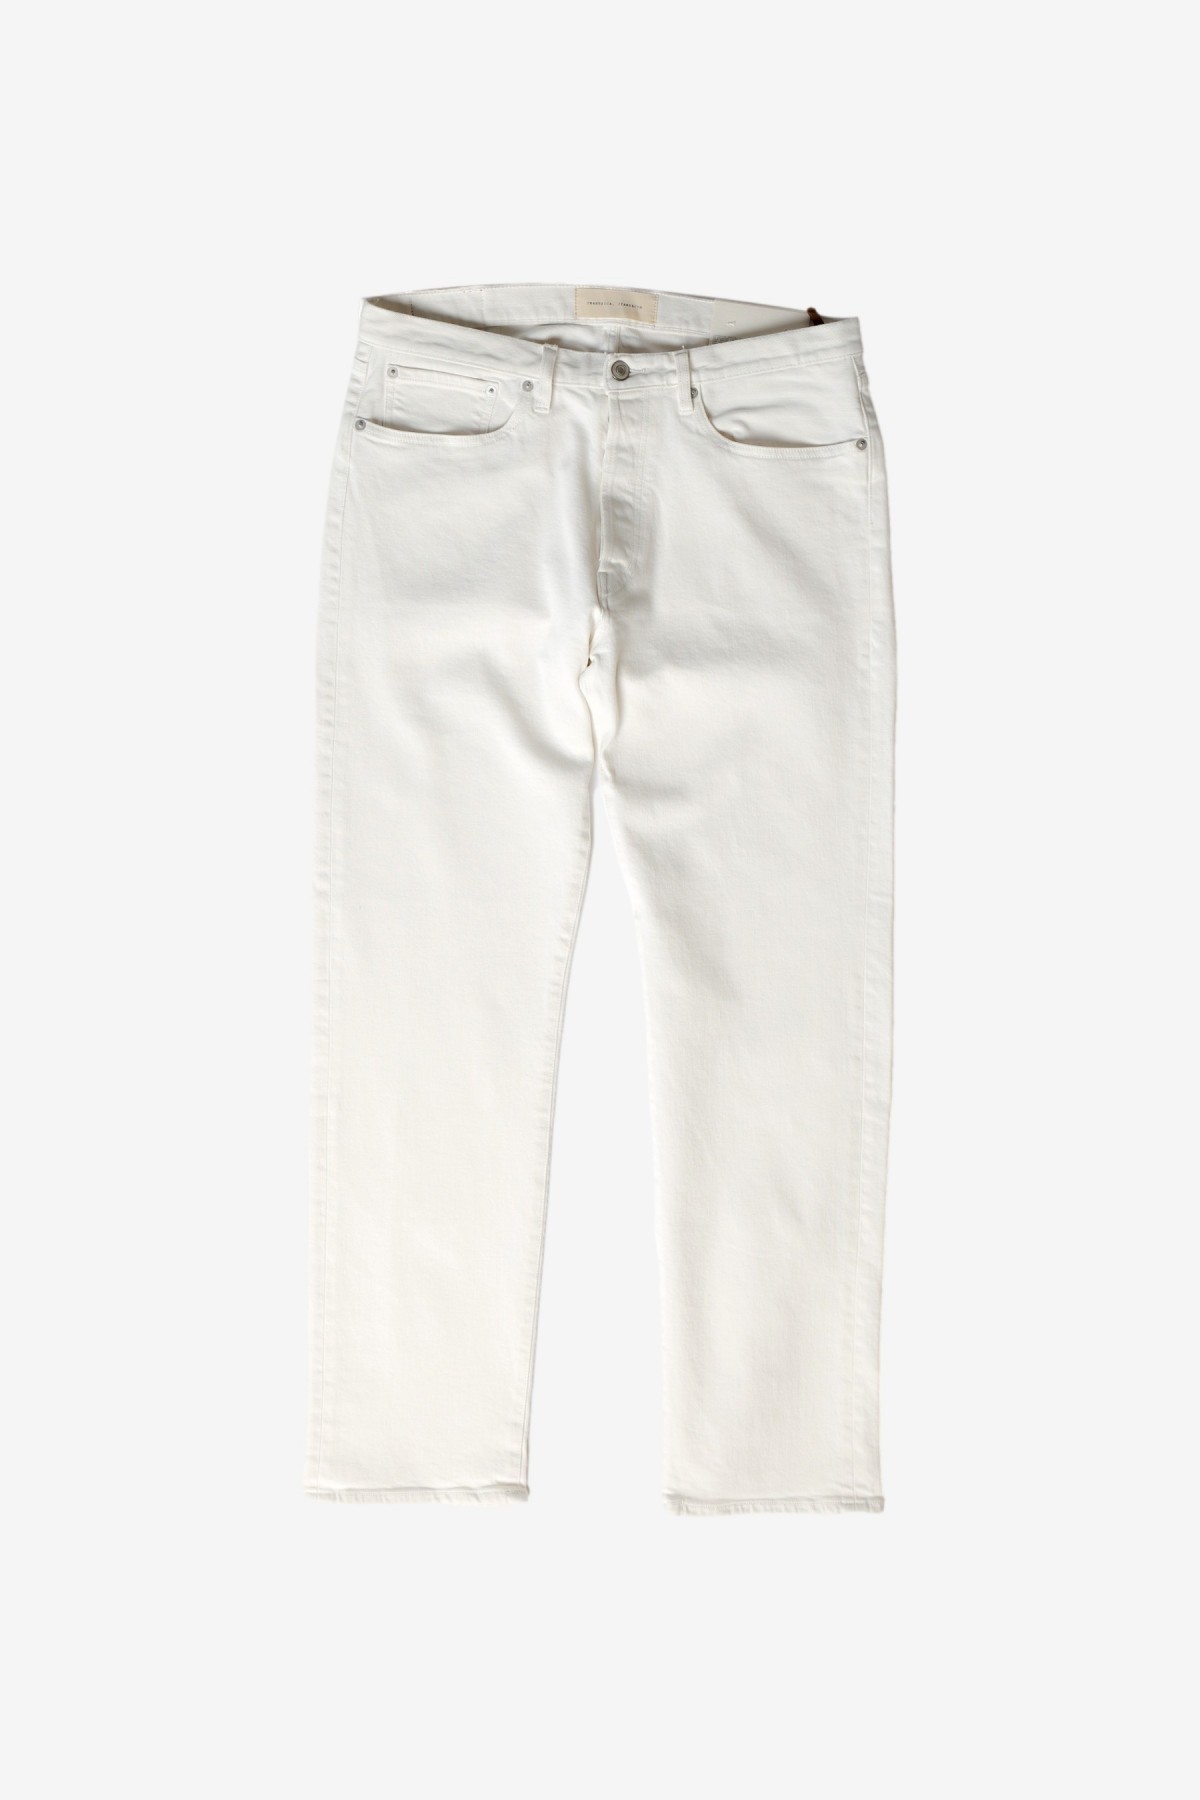 Jeanerica CM002 Casual Jeans in Natural White